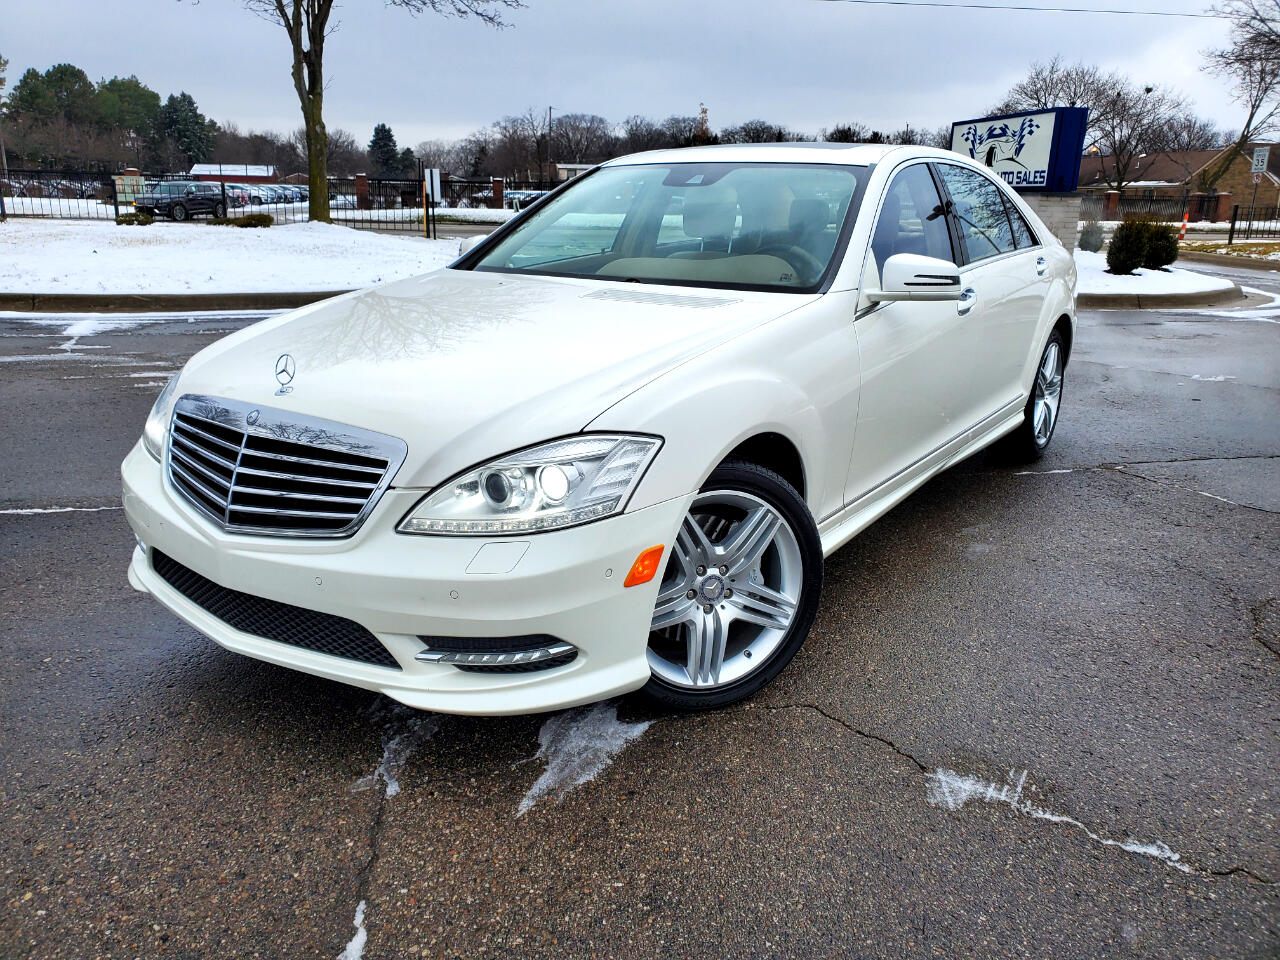 Used 2013 Mercedes-Benz S-Class S550 4-MATIC for Sale in Plymouth MI ...